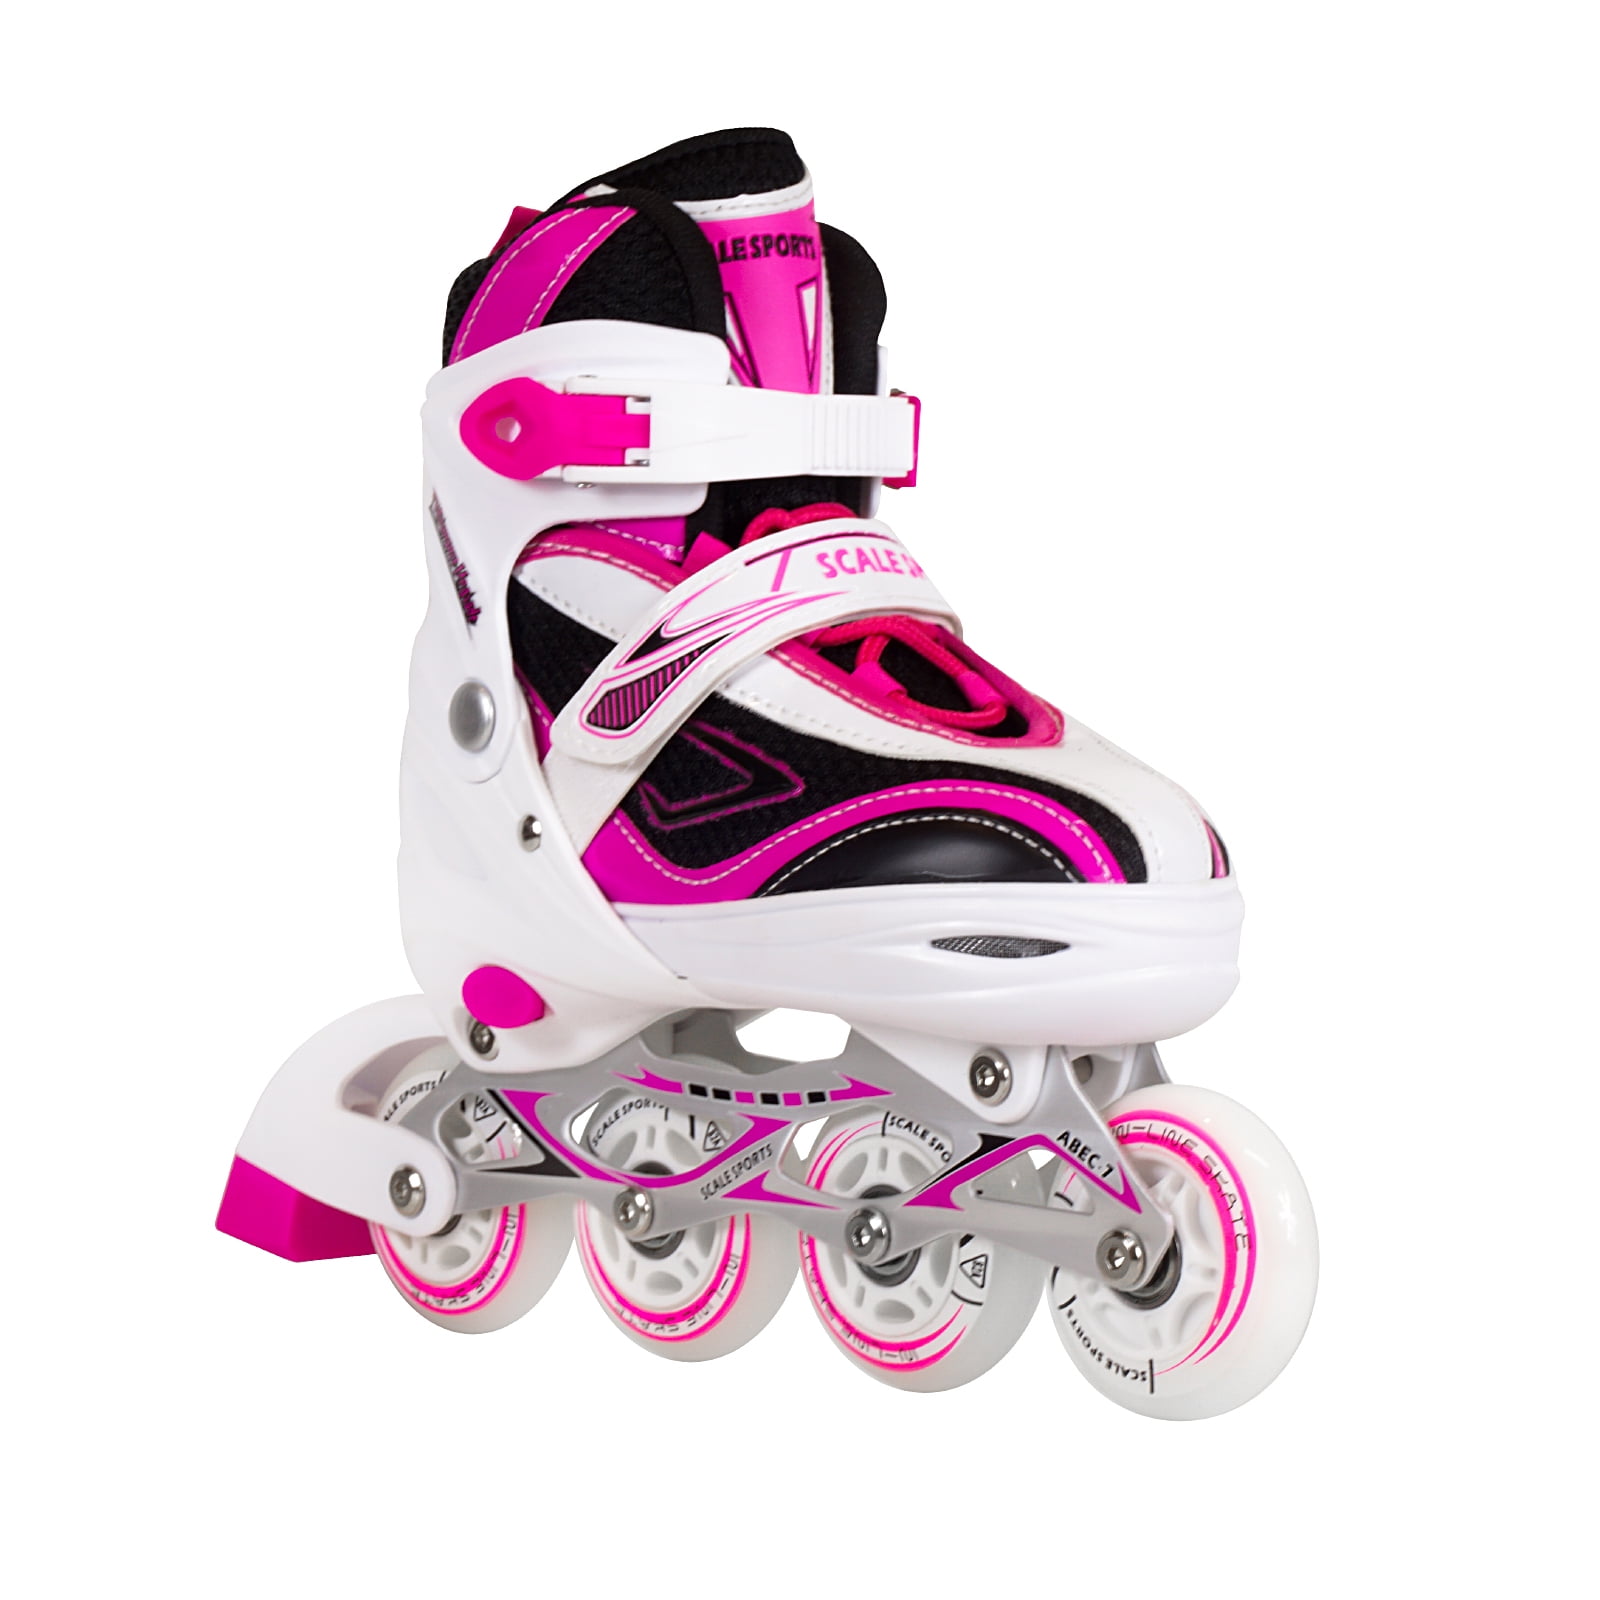 Kids/Teen Adjustable Inline Skates for Girls and Boys Durable Outdoor Roller Blades Illuminating Front Wheel 